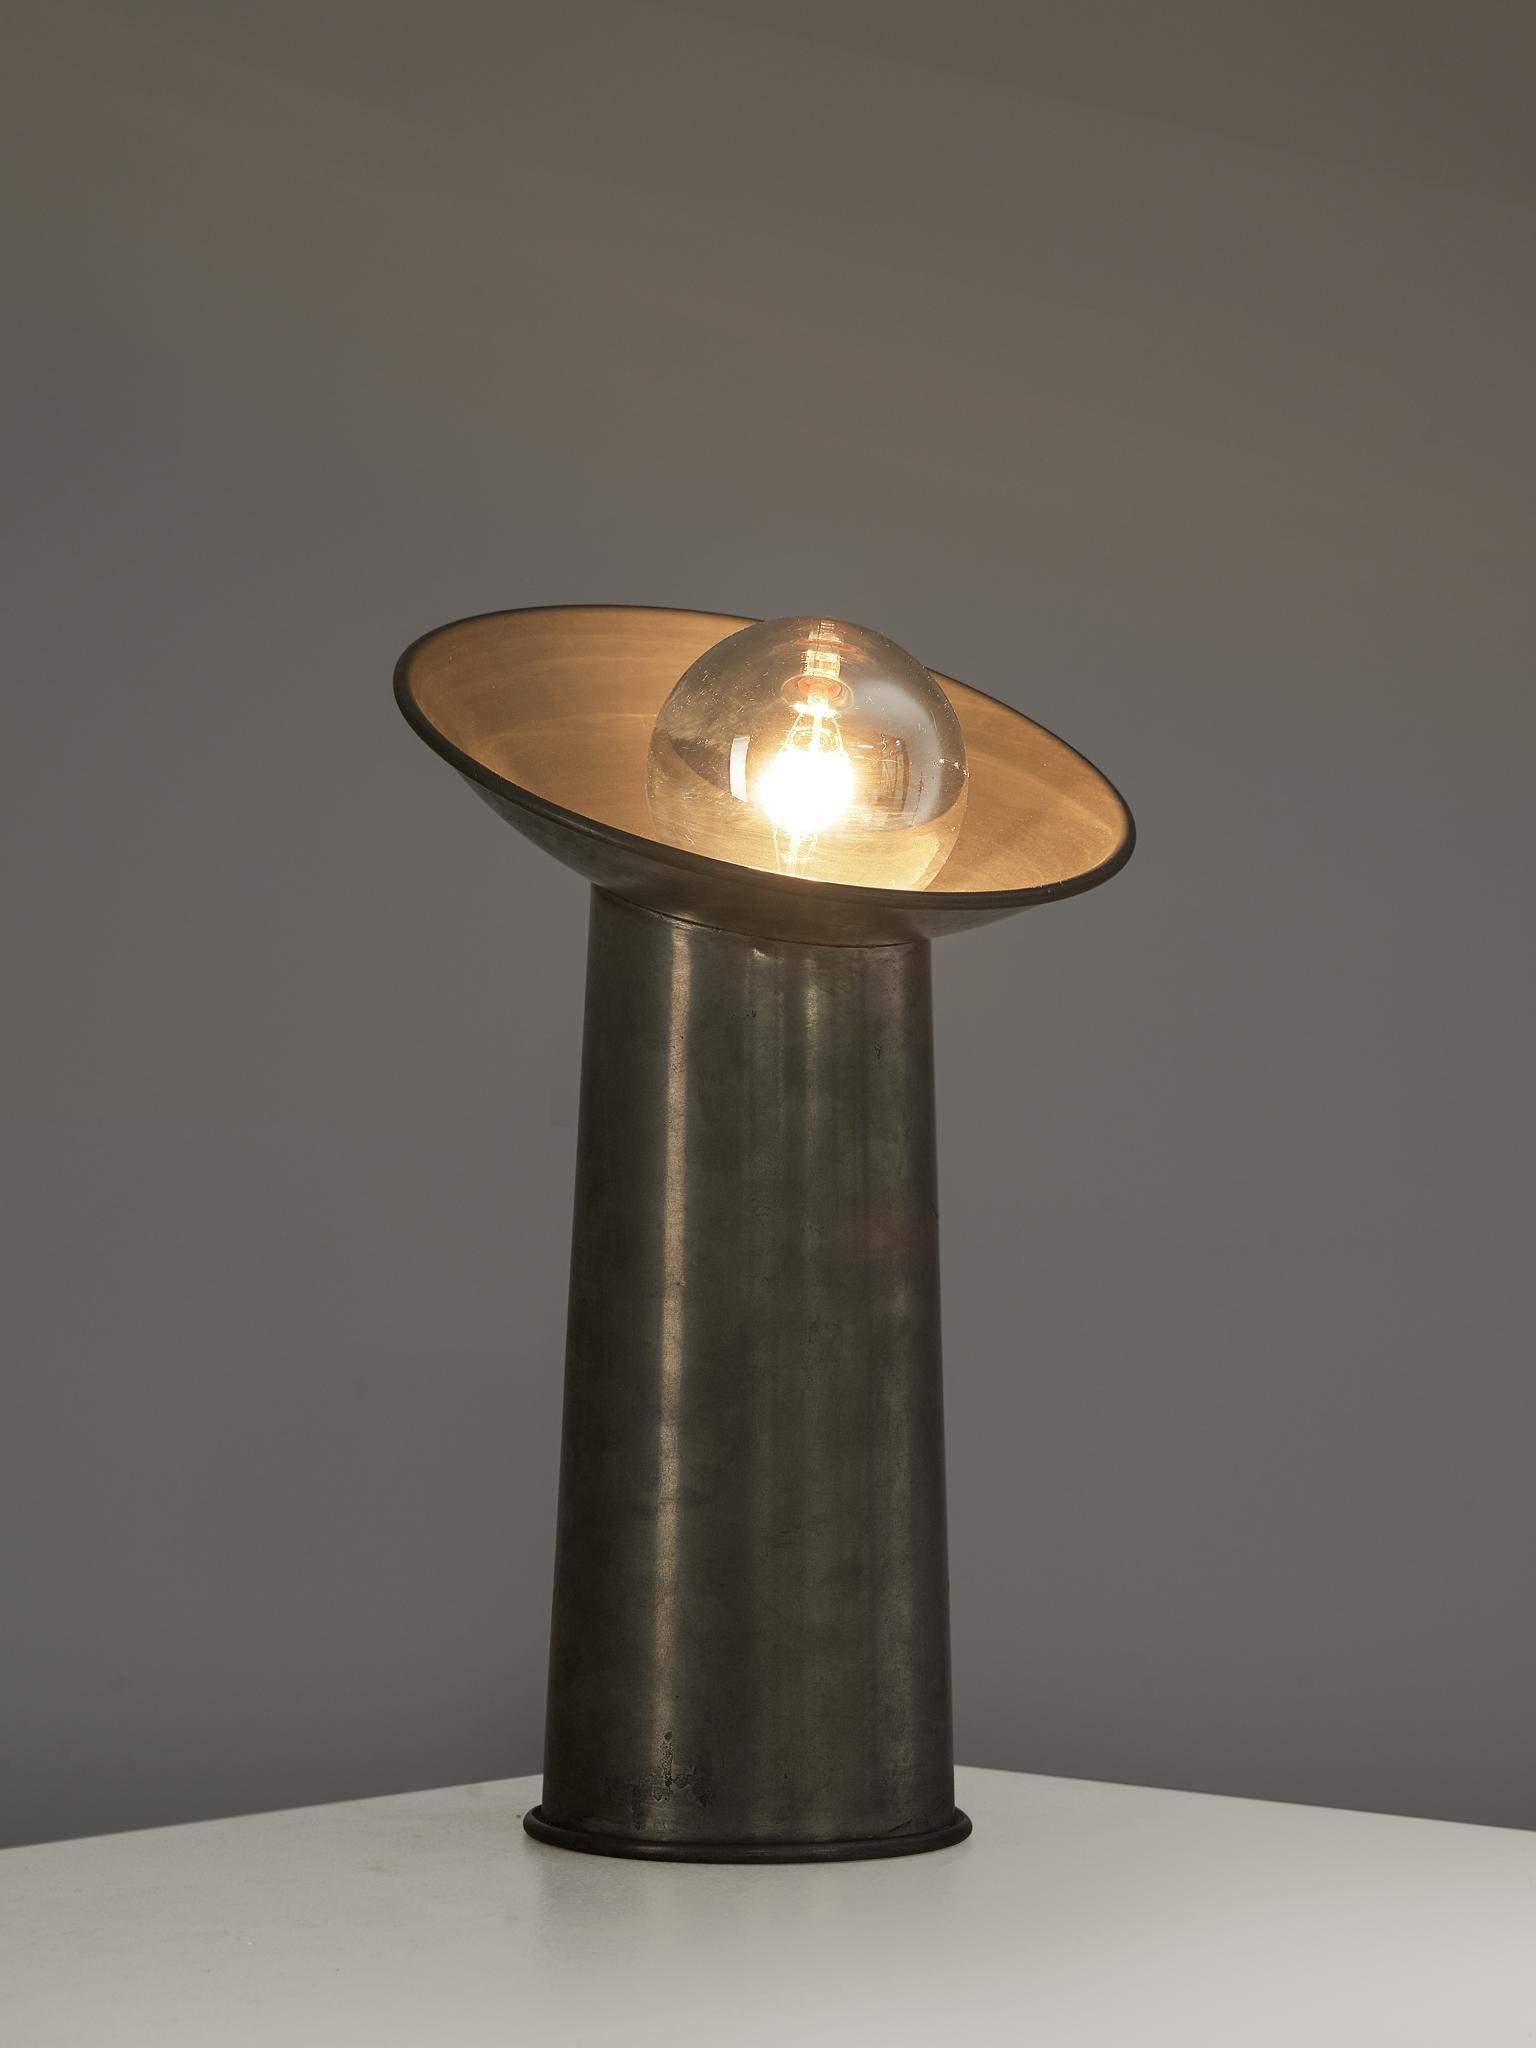 Gjilla Giani for Sormani, 'Radar' table lamp, pewter and glass, Italy, circa 1970.

A futuristic table lamp designed by the architect Gjilla Giani for Sormani. The lamp is completely executed in pewter. The shade is faced up, holding a large,